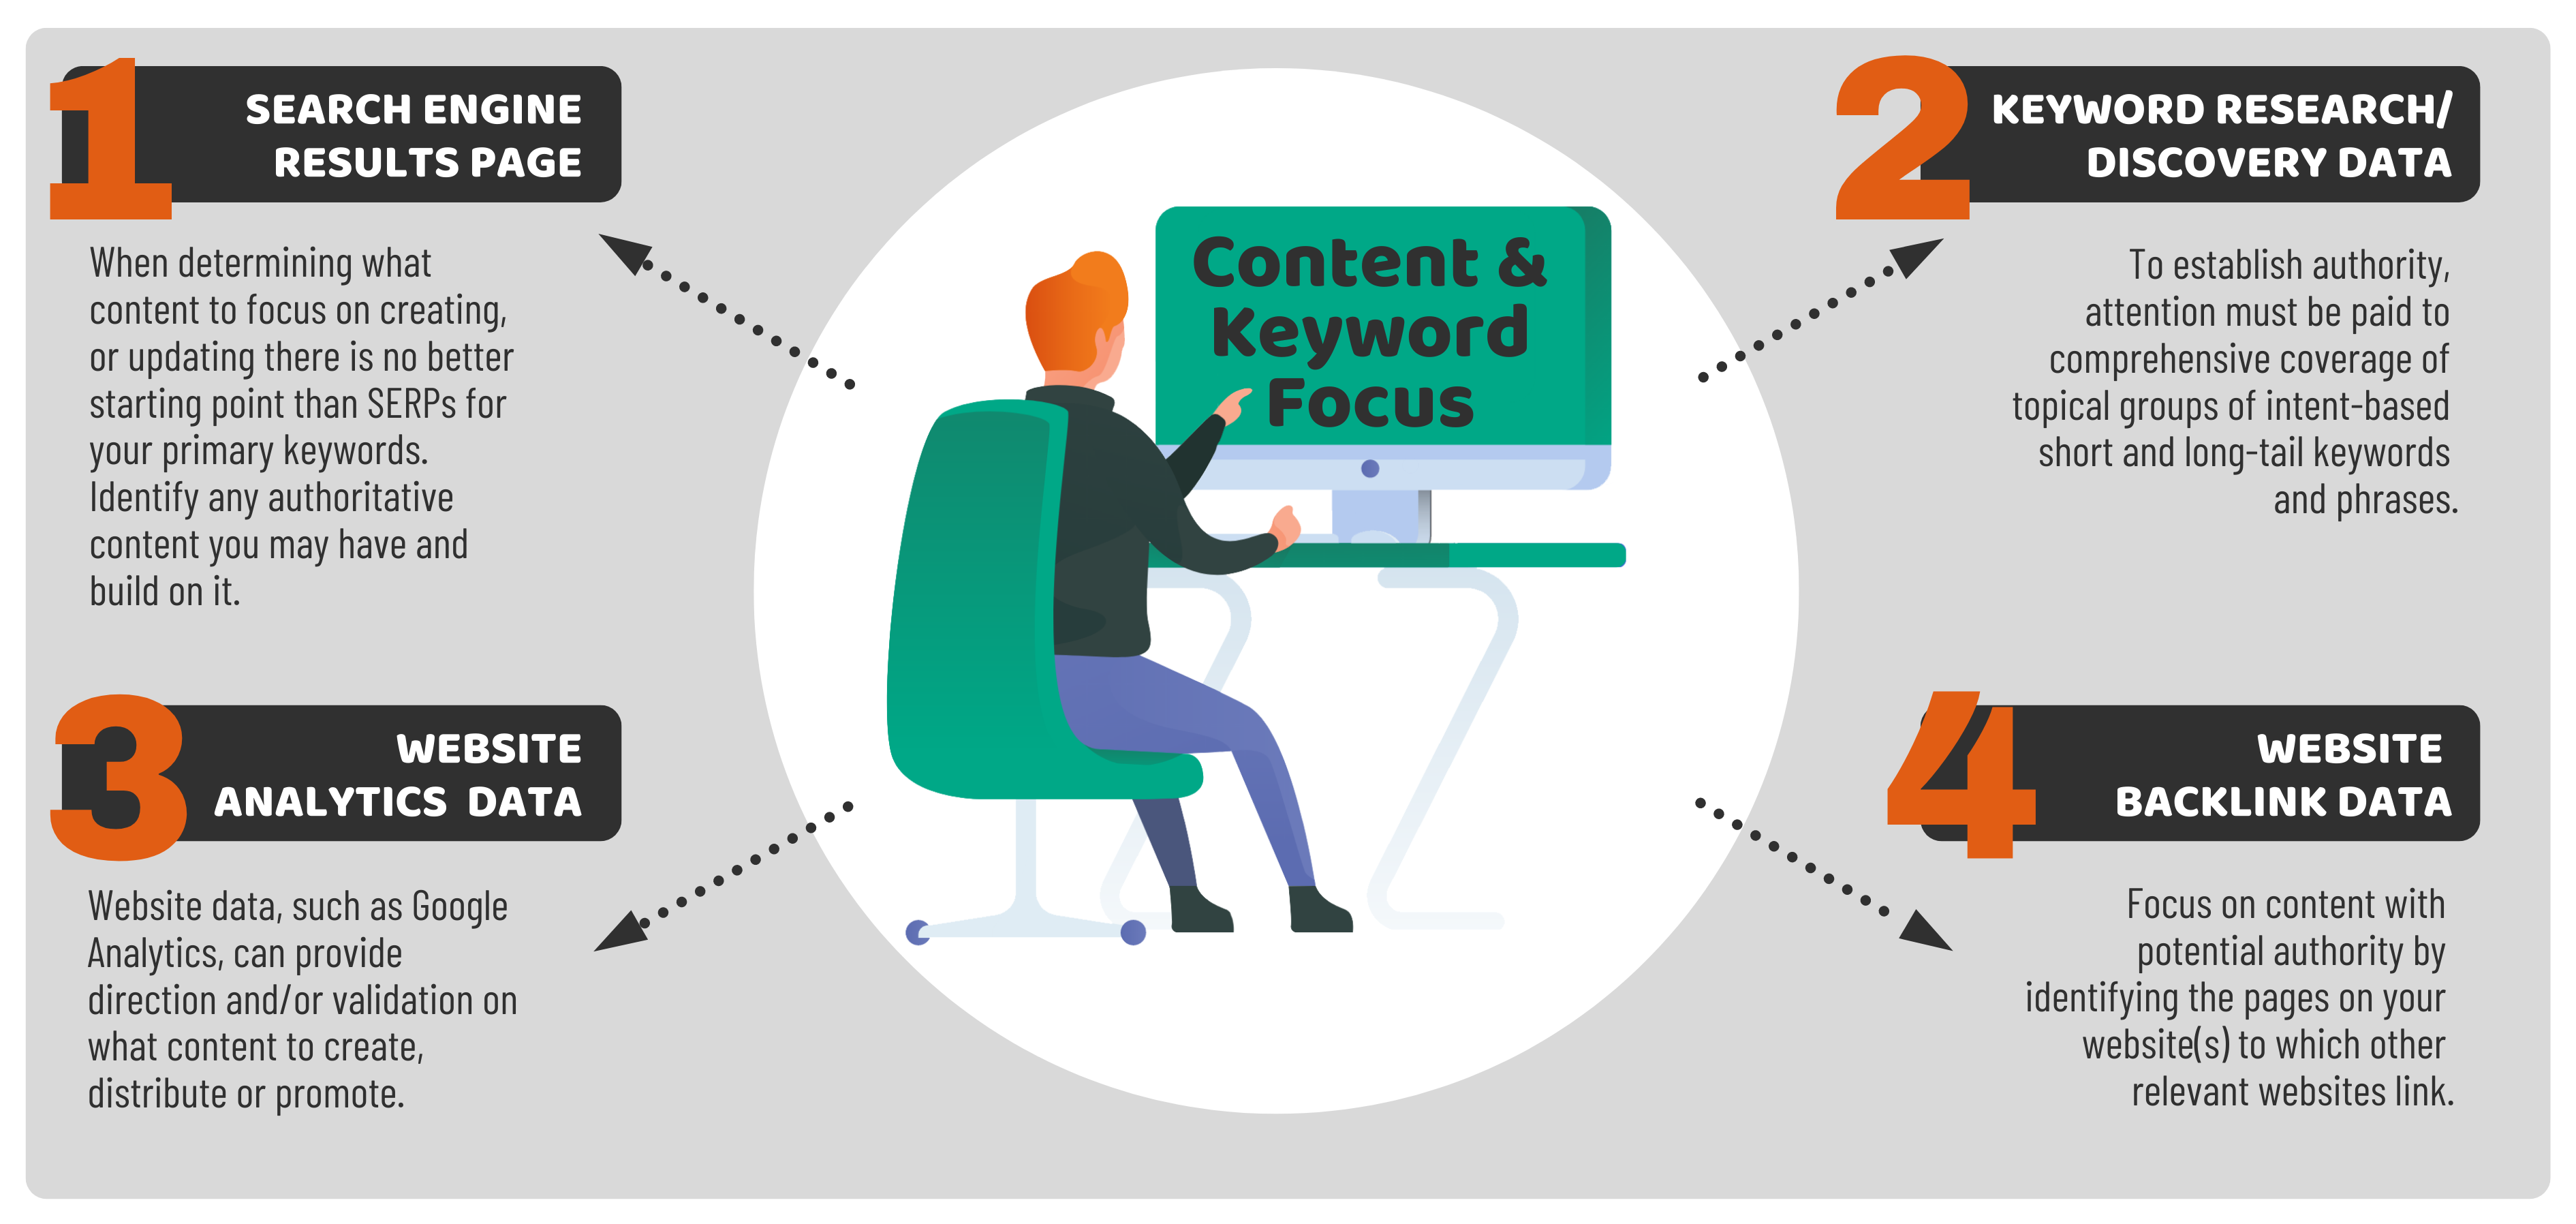 Four Data Sources to Help Focus Content and Keywords